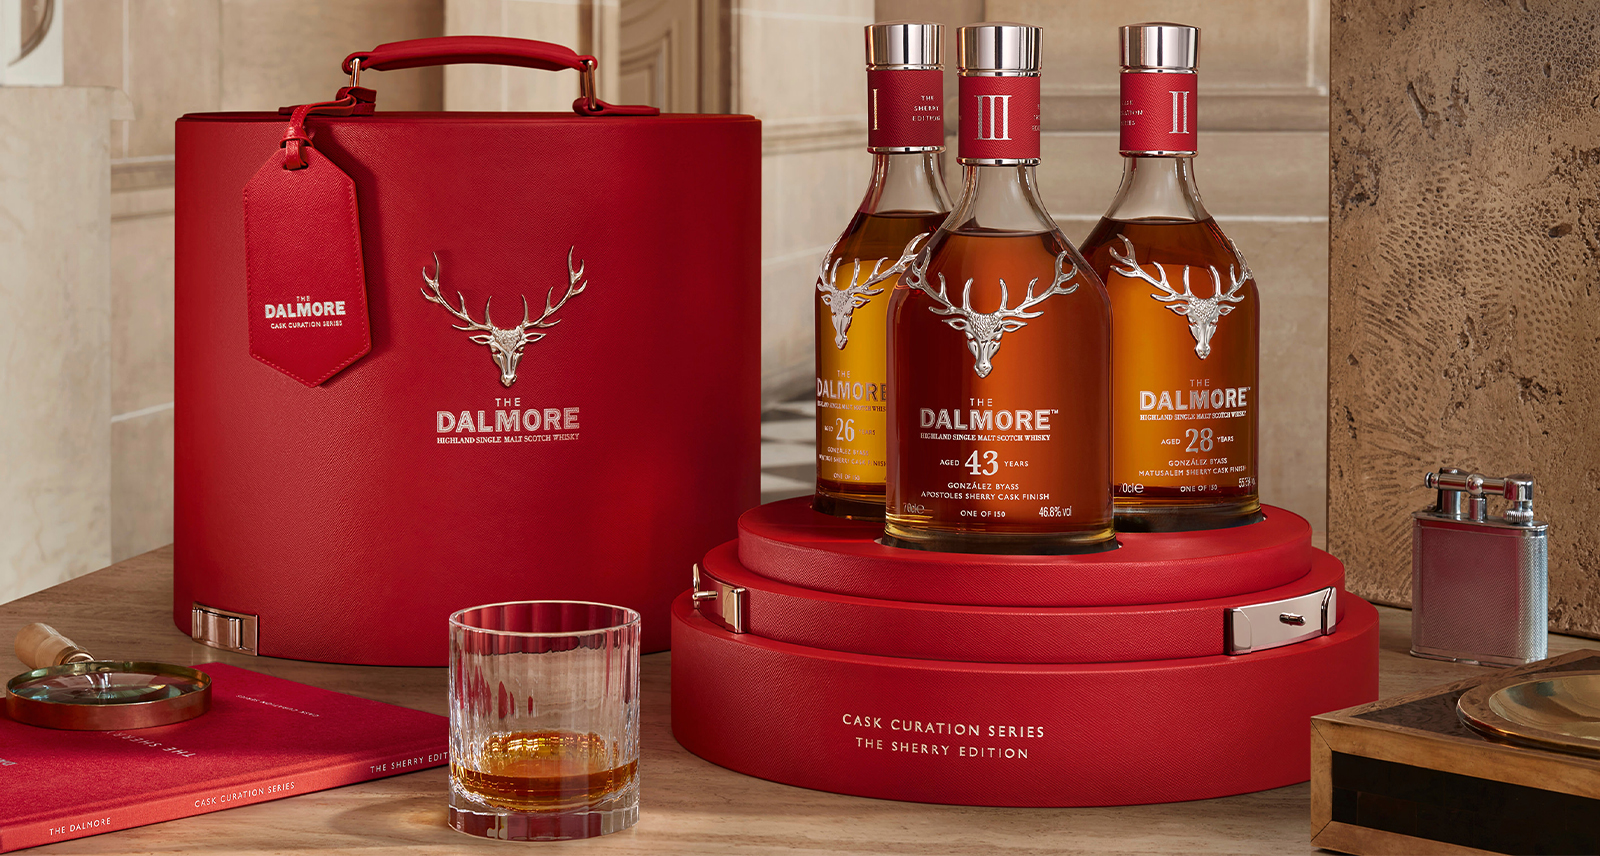 dalmore cask curation series the sherry edition